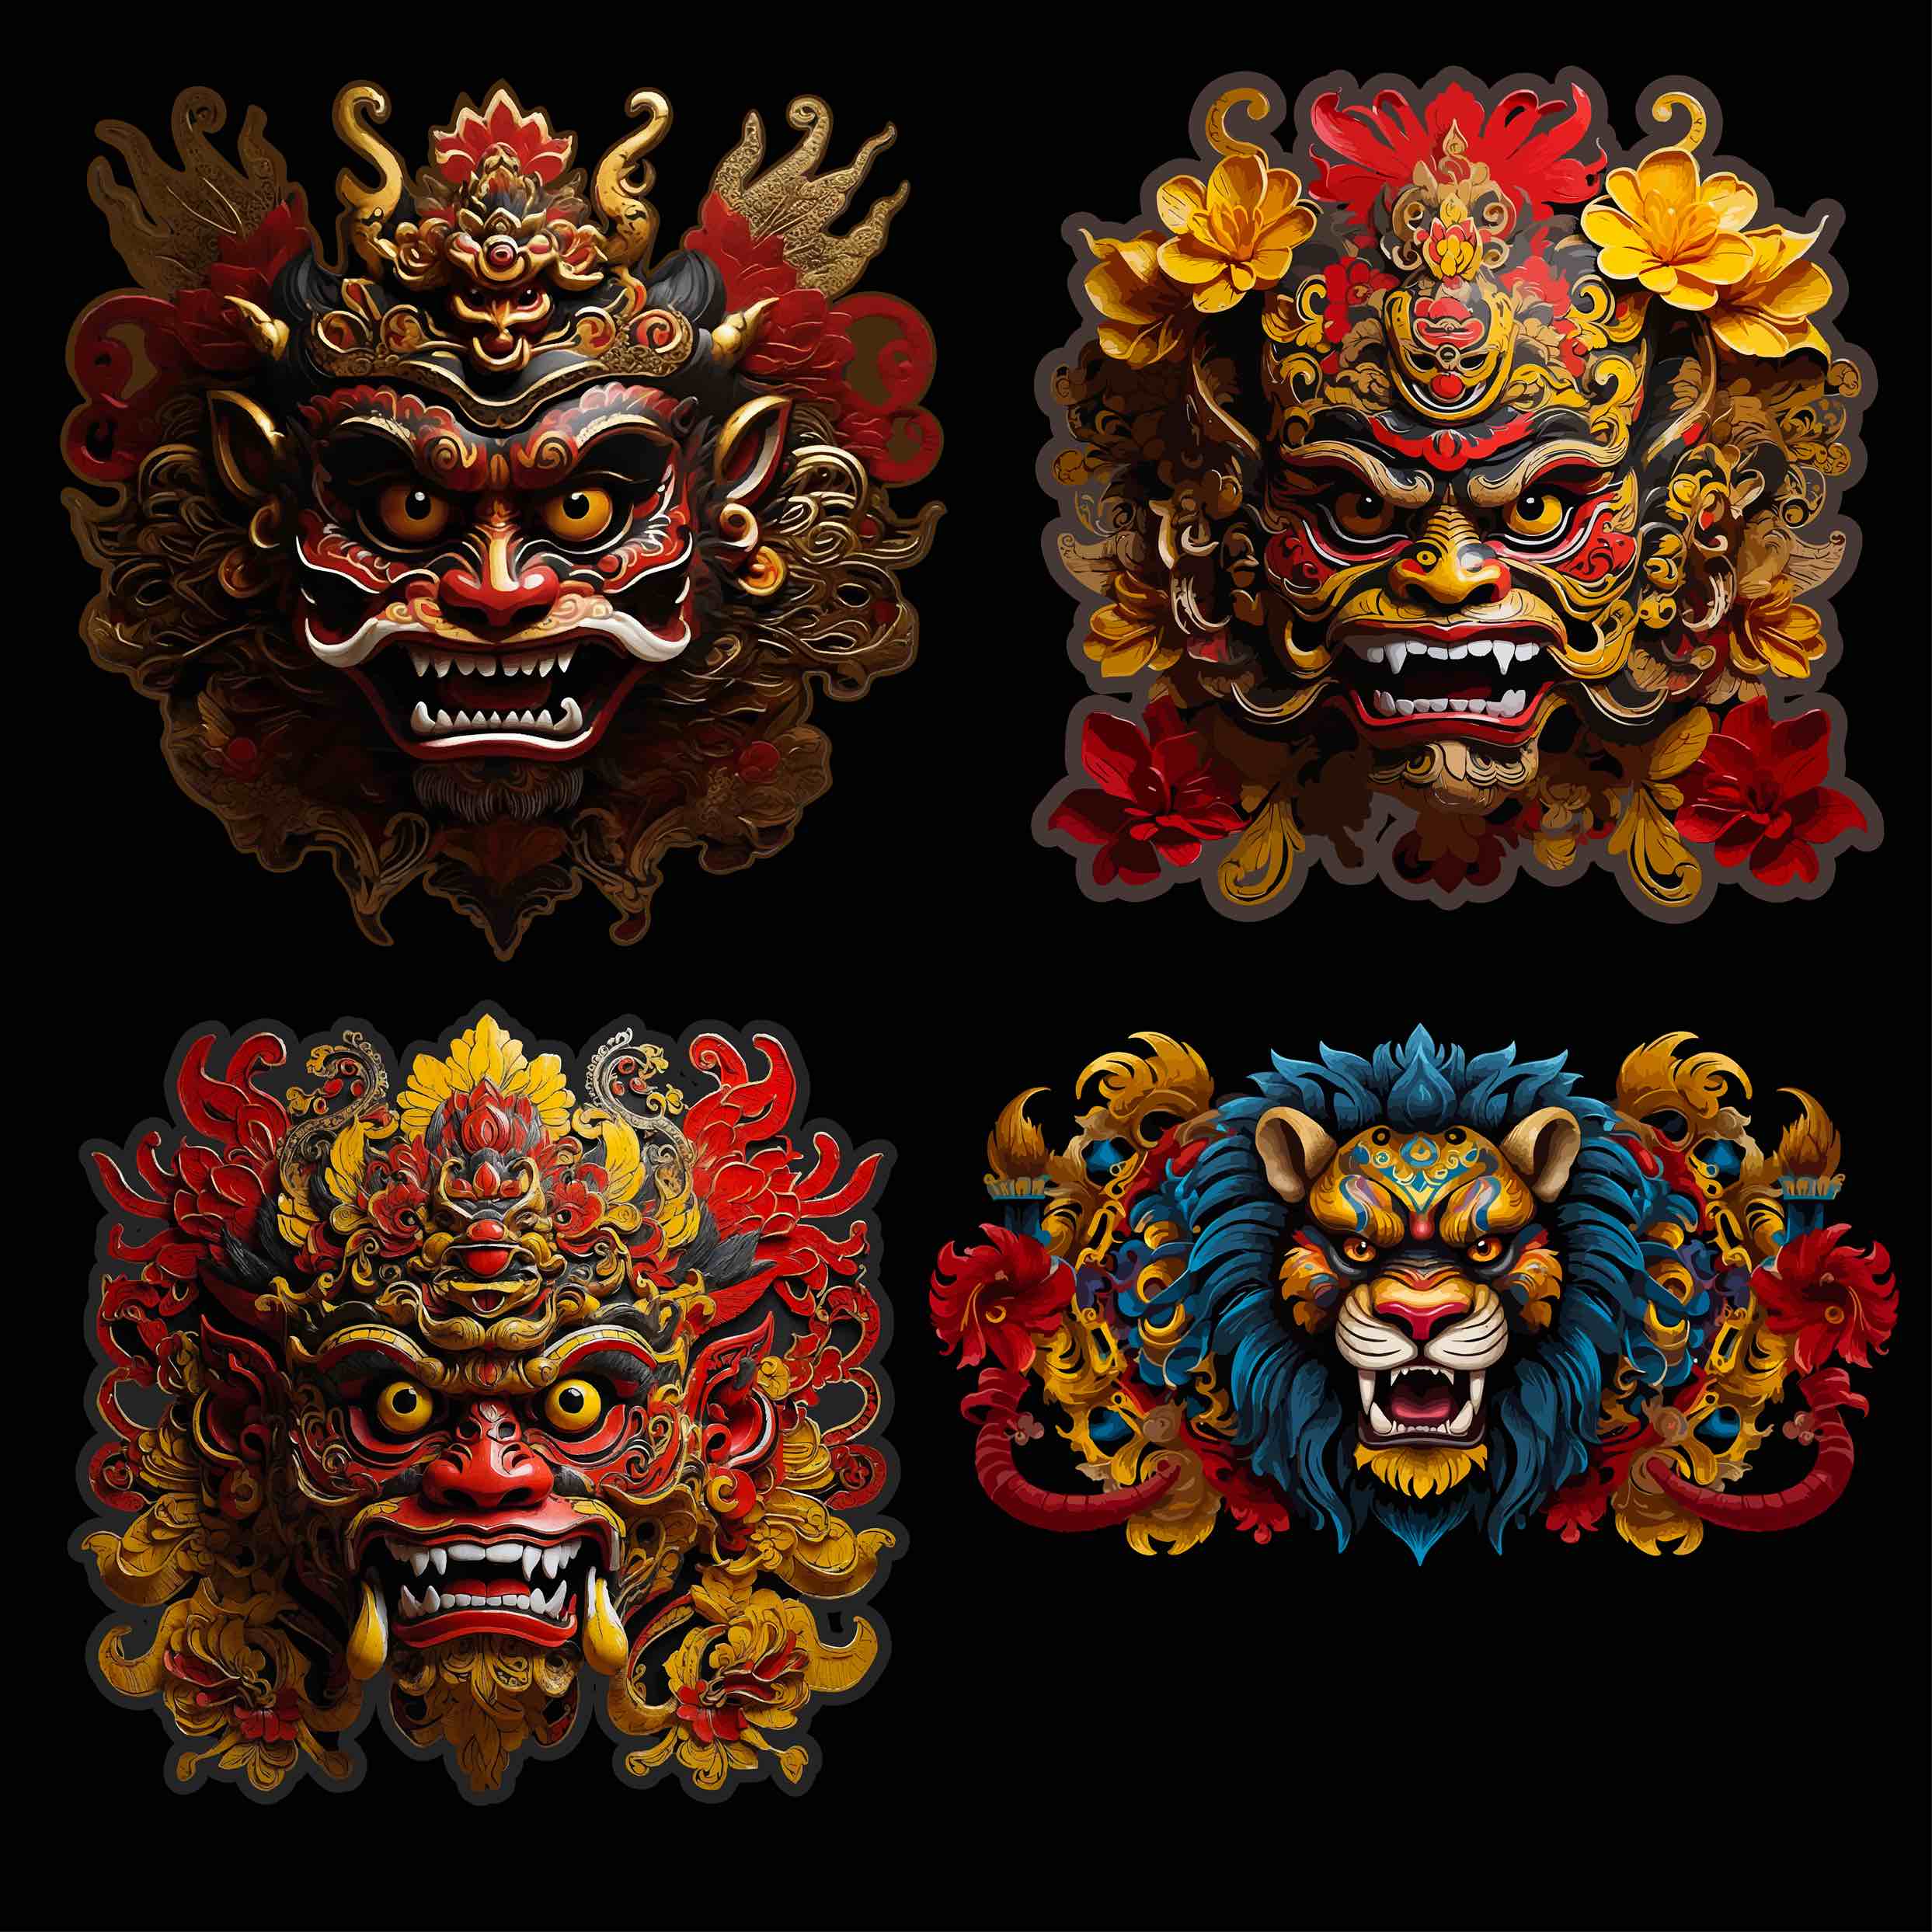 Balinese Lion Dance: A Collection of Intricate Barong Masks Suitable for Fashion and Art Lovers - only 10$ cover image.